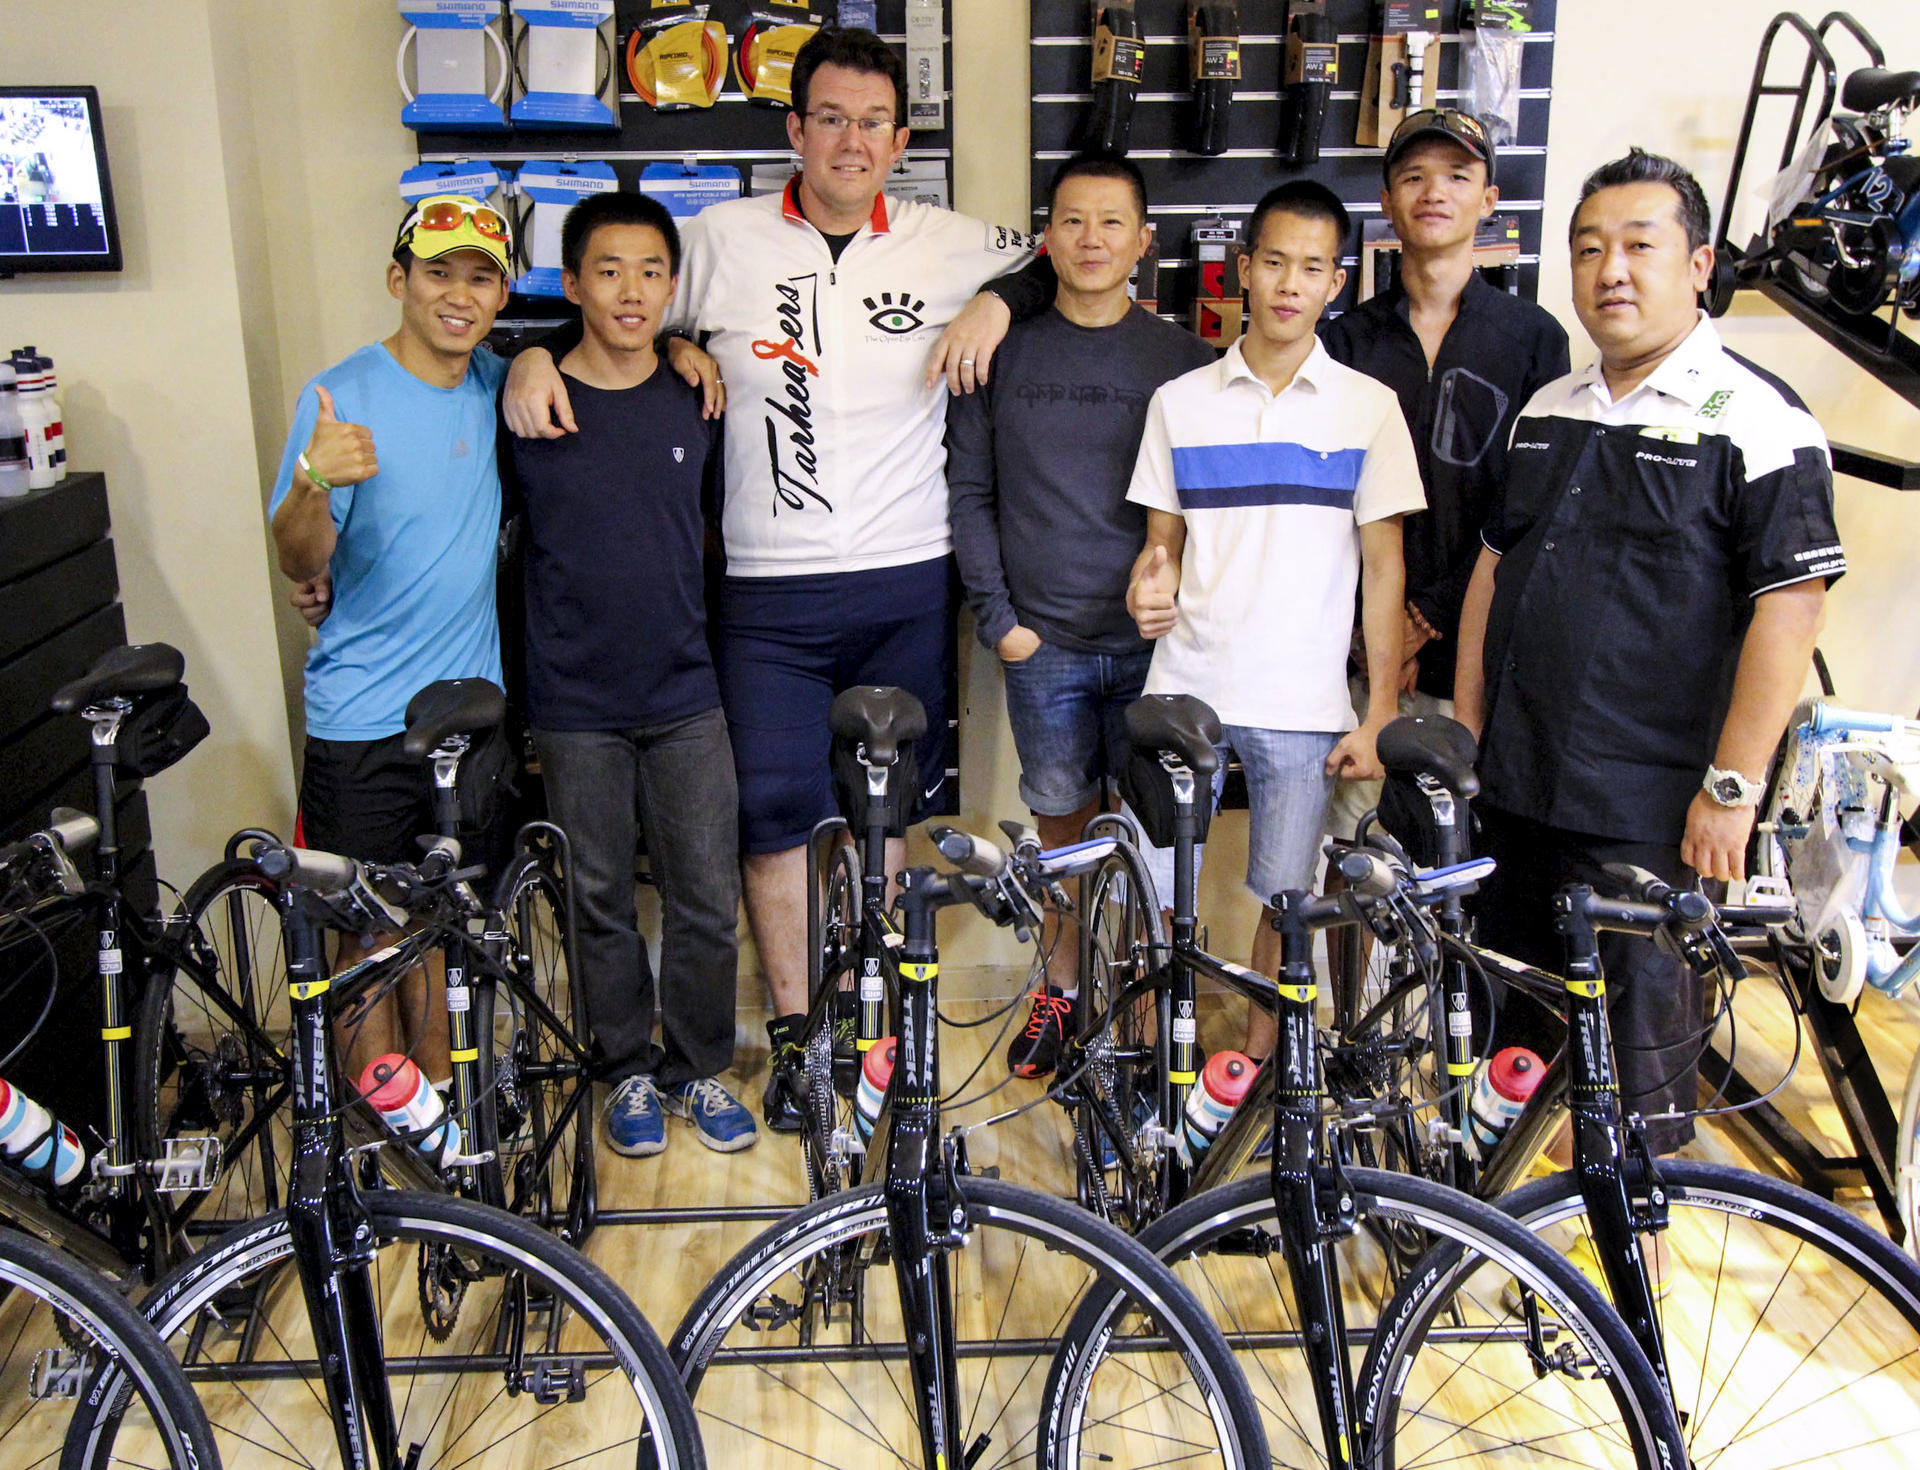 Team leader Nick Smith (third from left), resident manager of the Futian Shangri-La, Shenzhen with fellow riders.